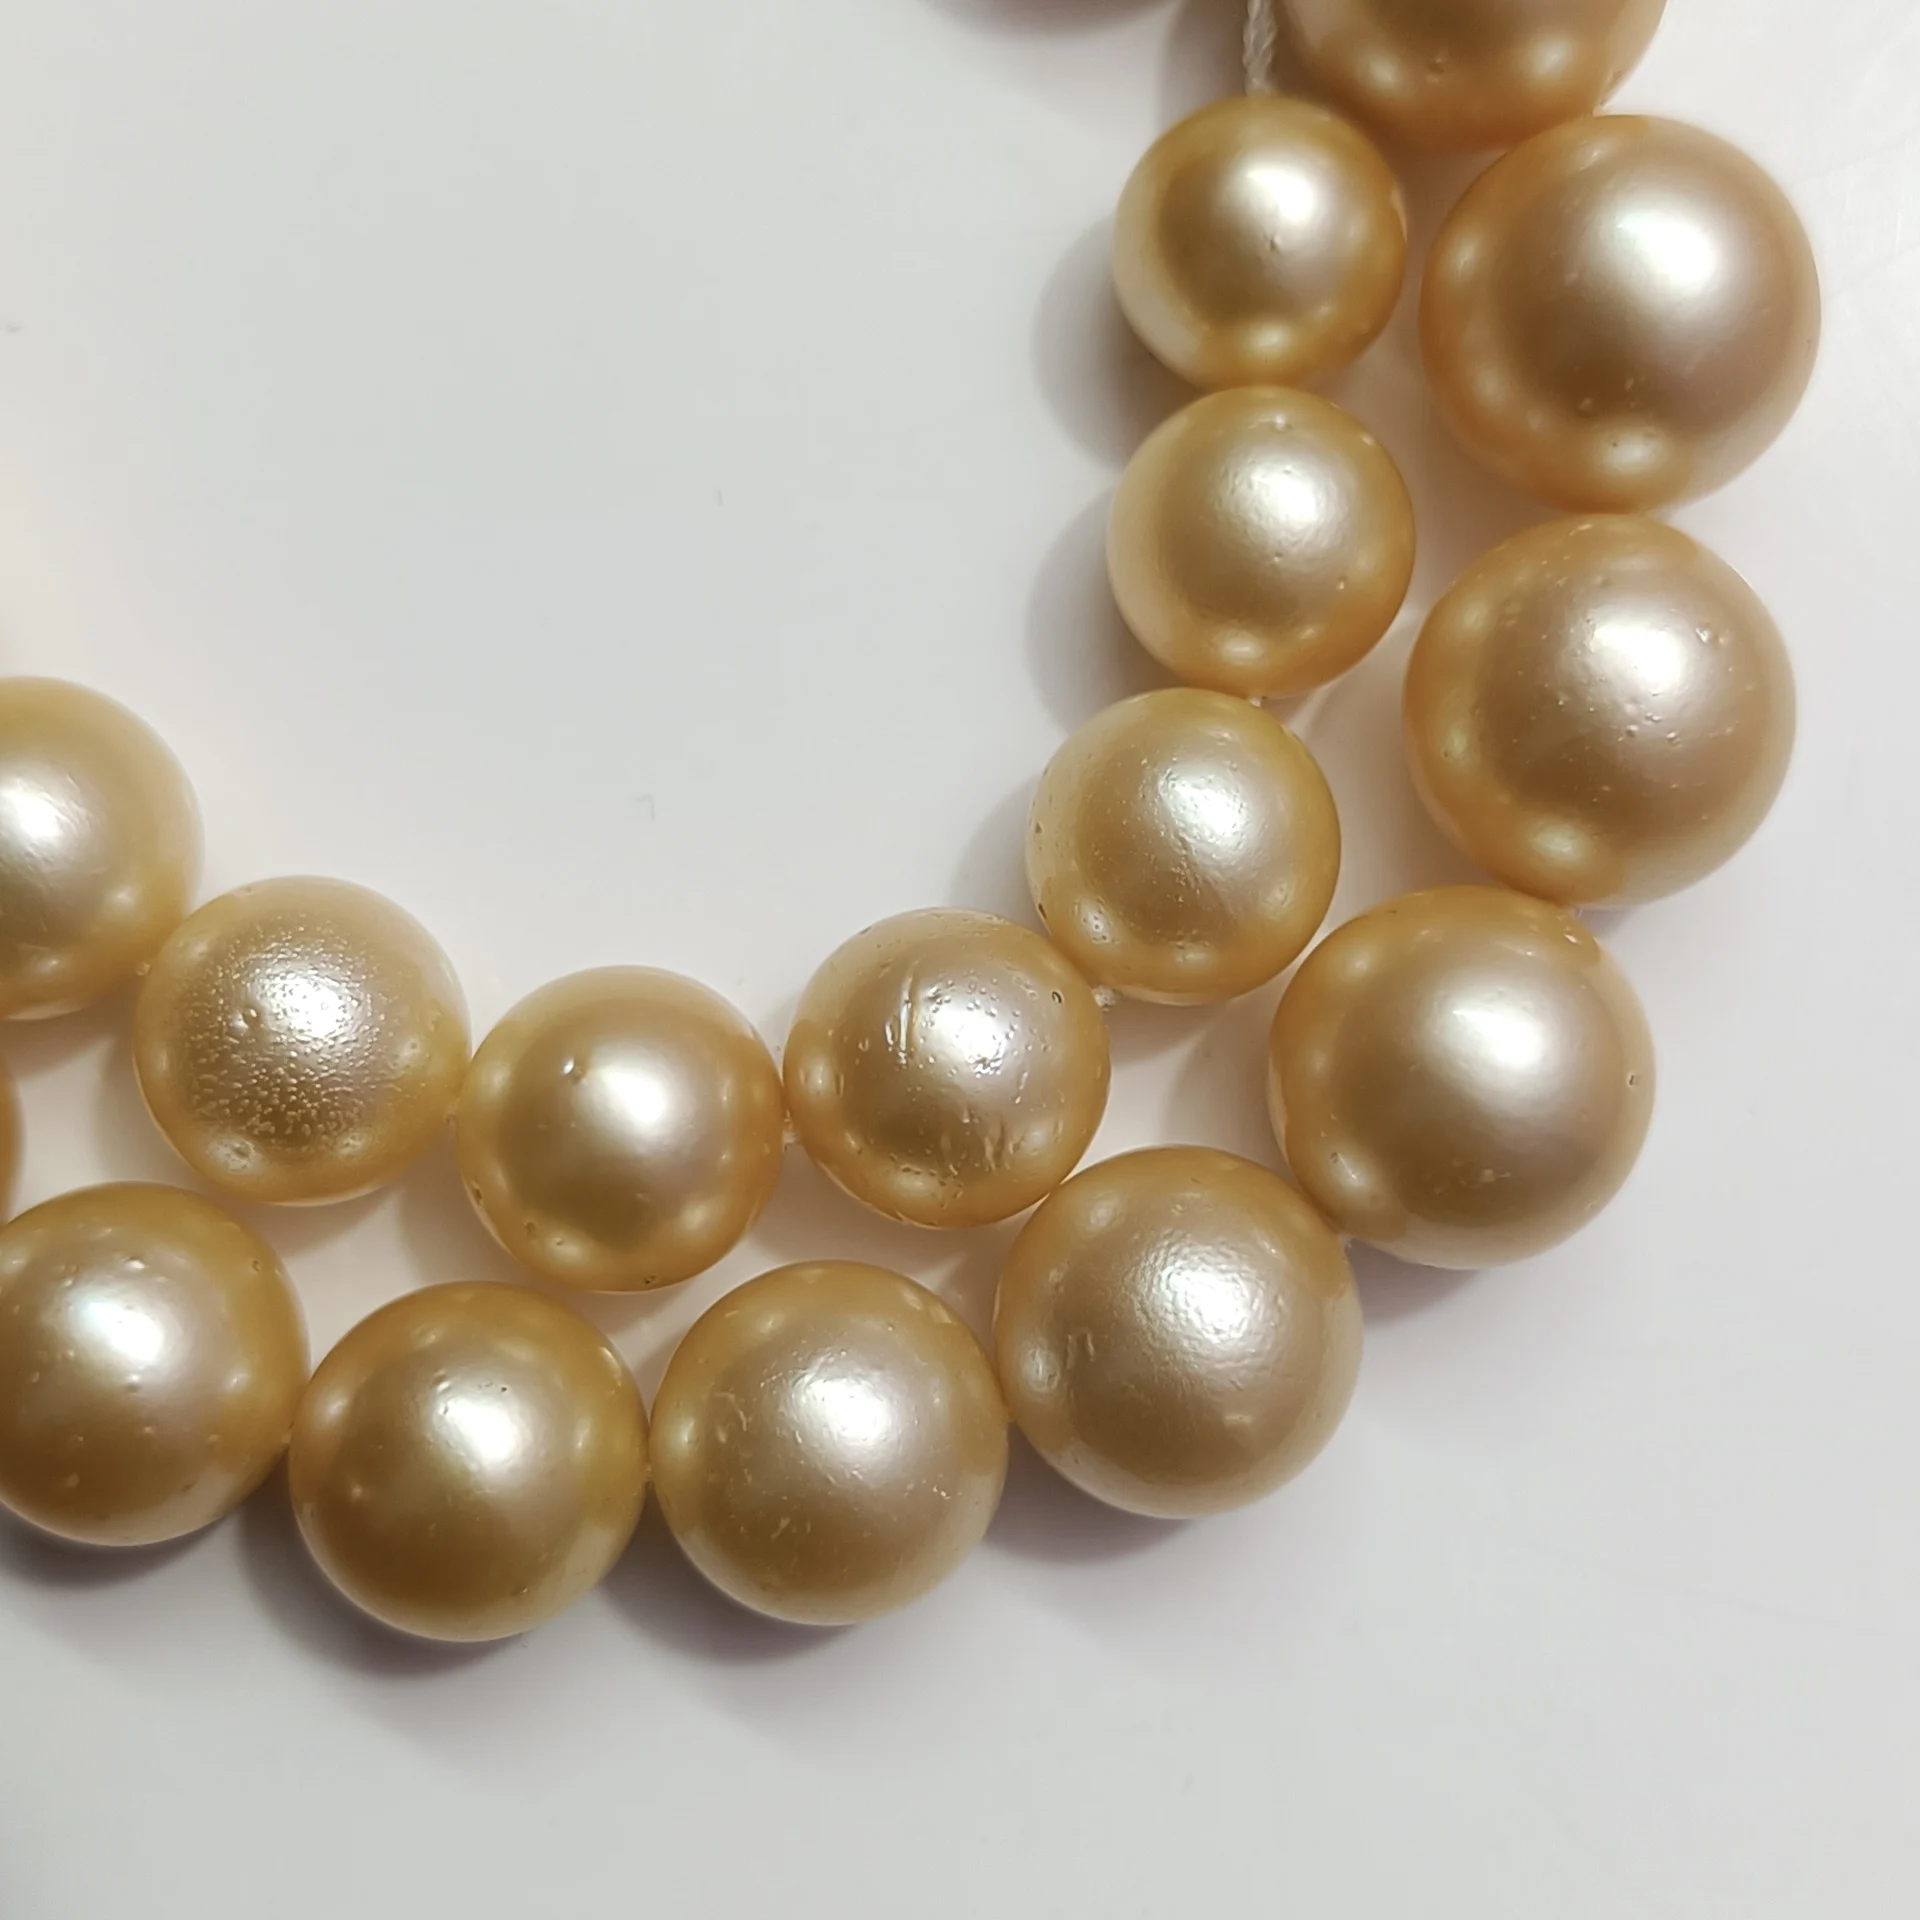 Extremely Rare Golden South Sea Pearl Beads For Jewelry Making 10-14mm ...